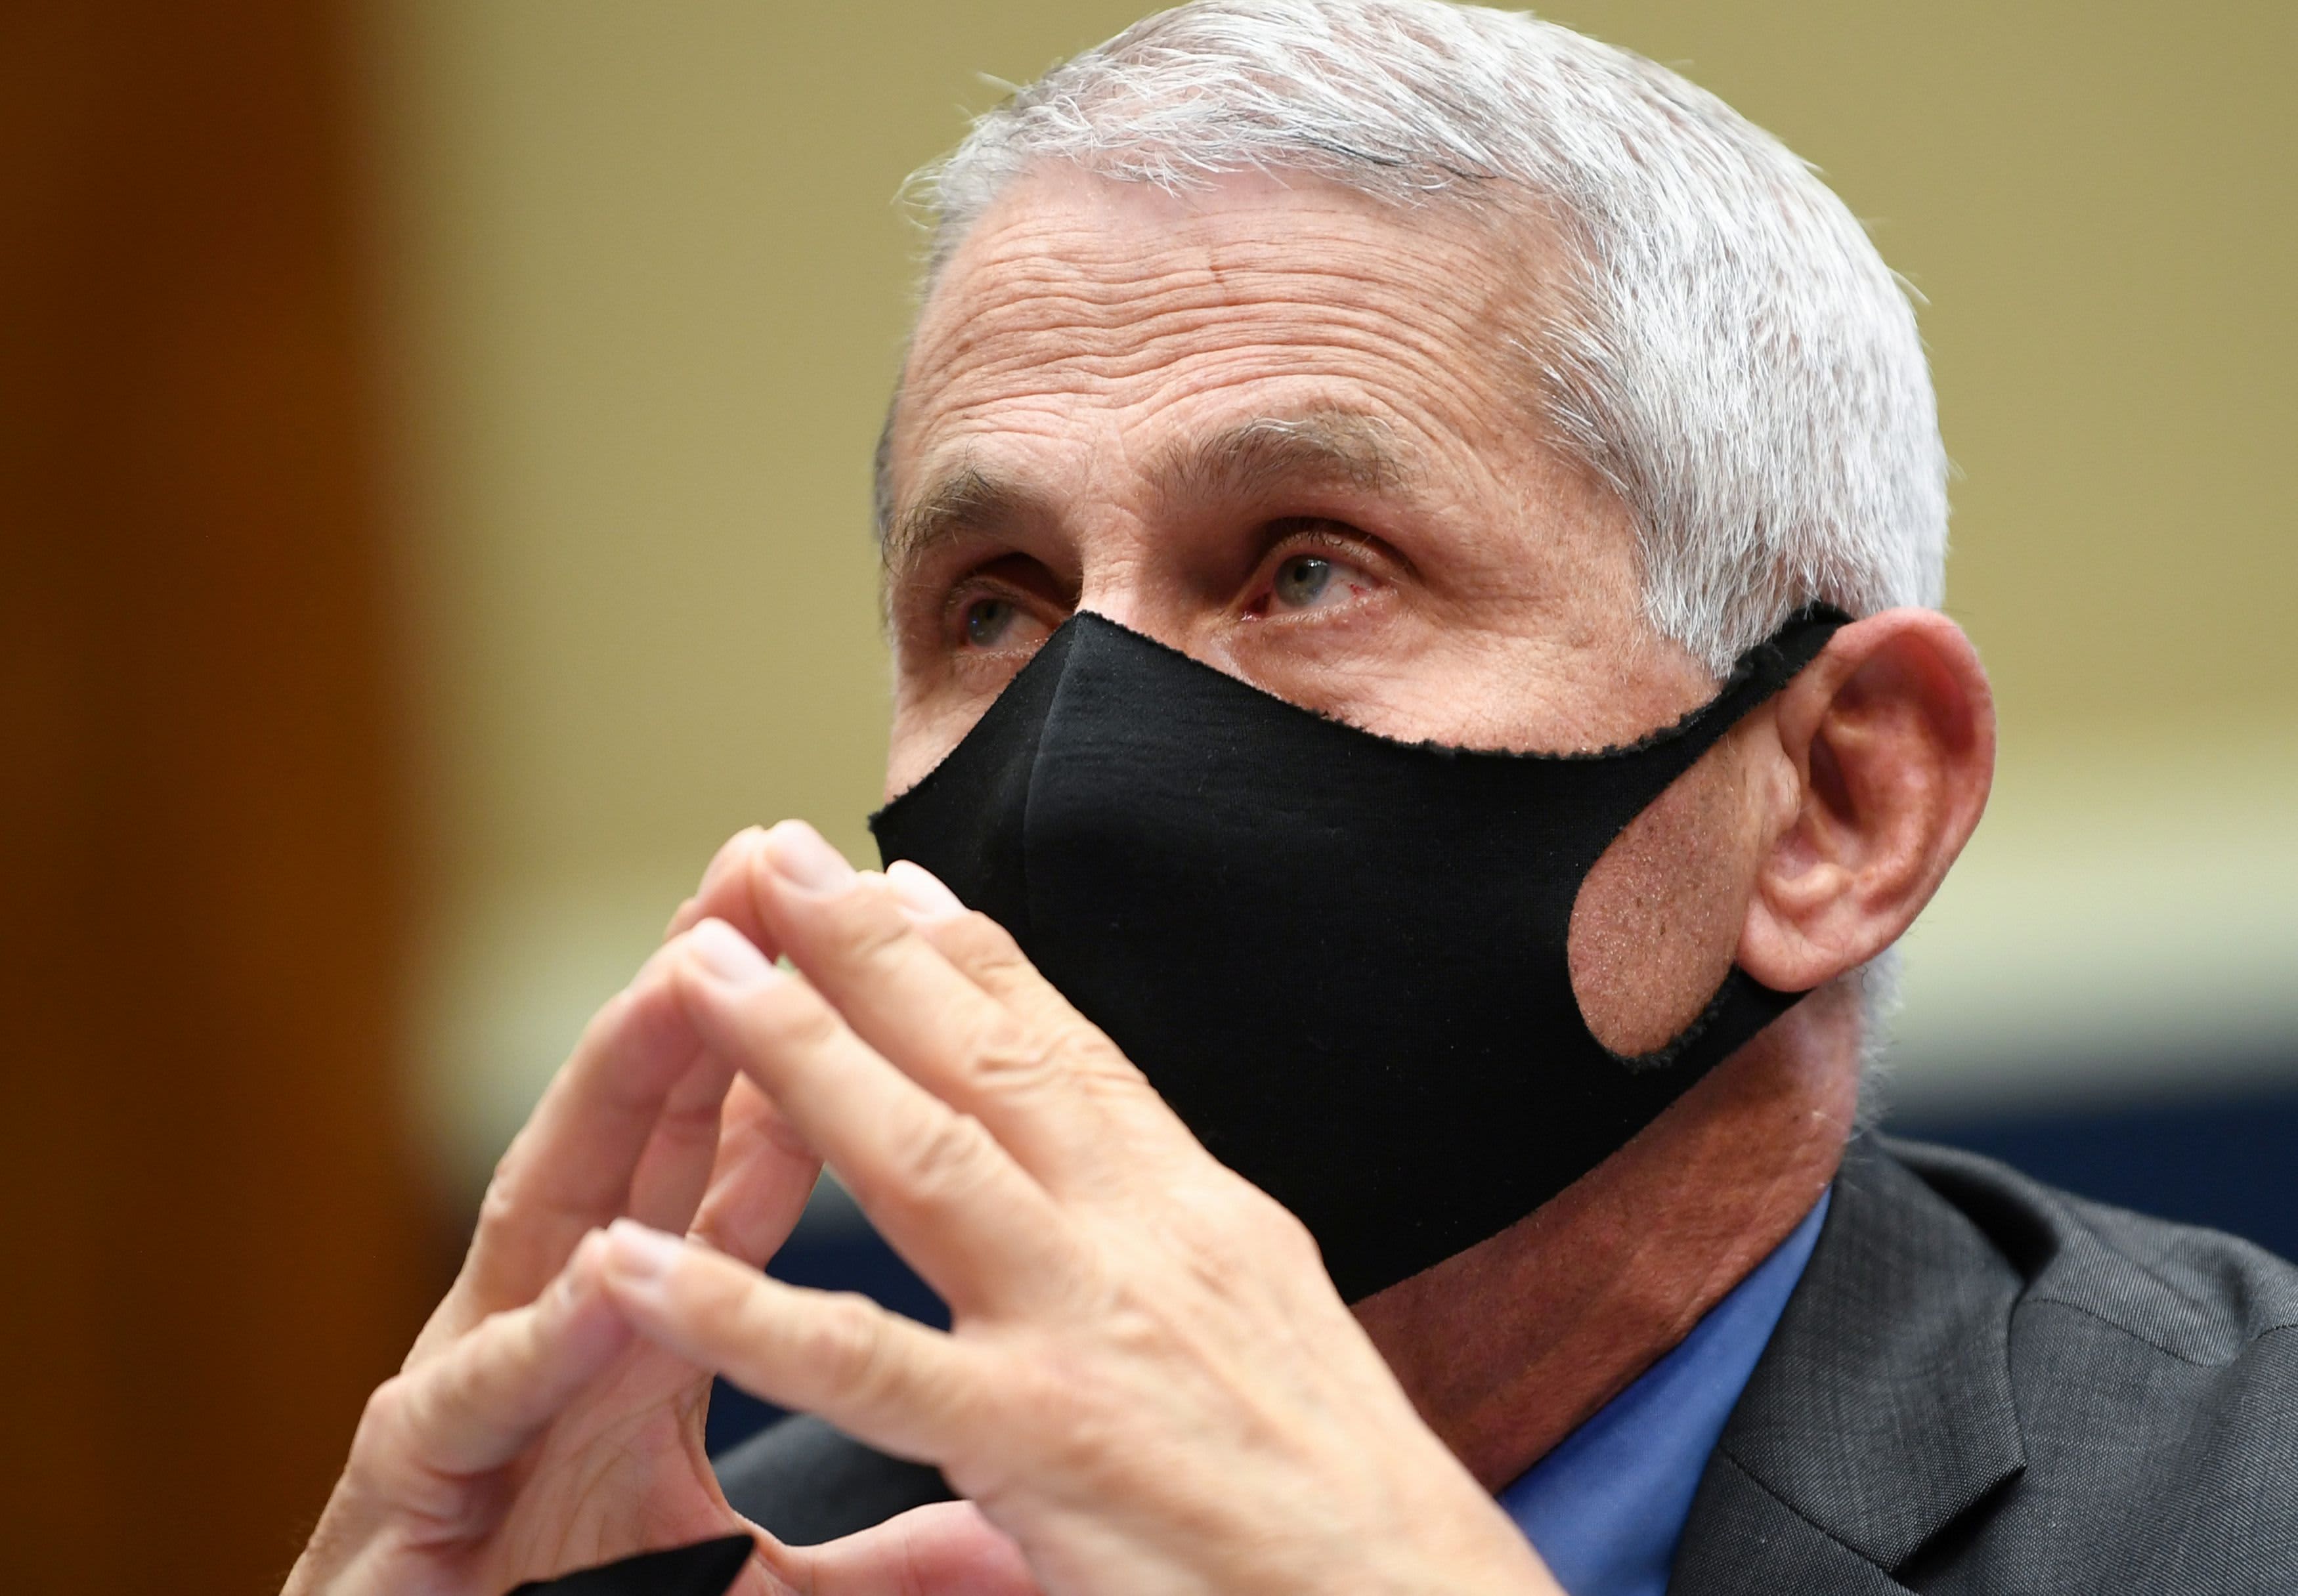 Coronavirus live updates: Fauci, other top health officials to testify before lawmakers - CNBC